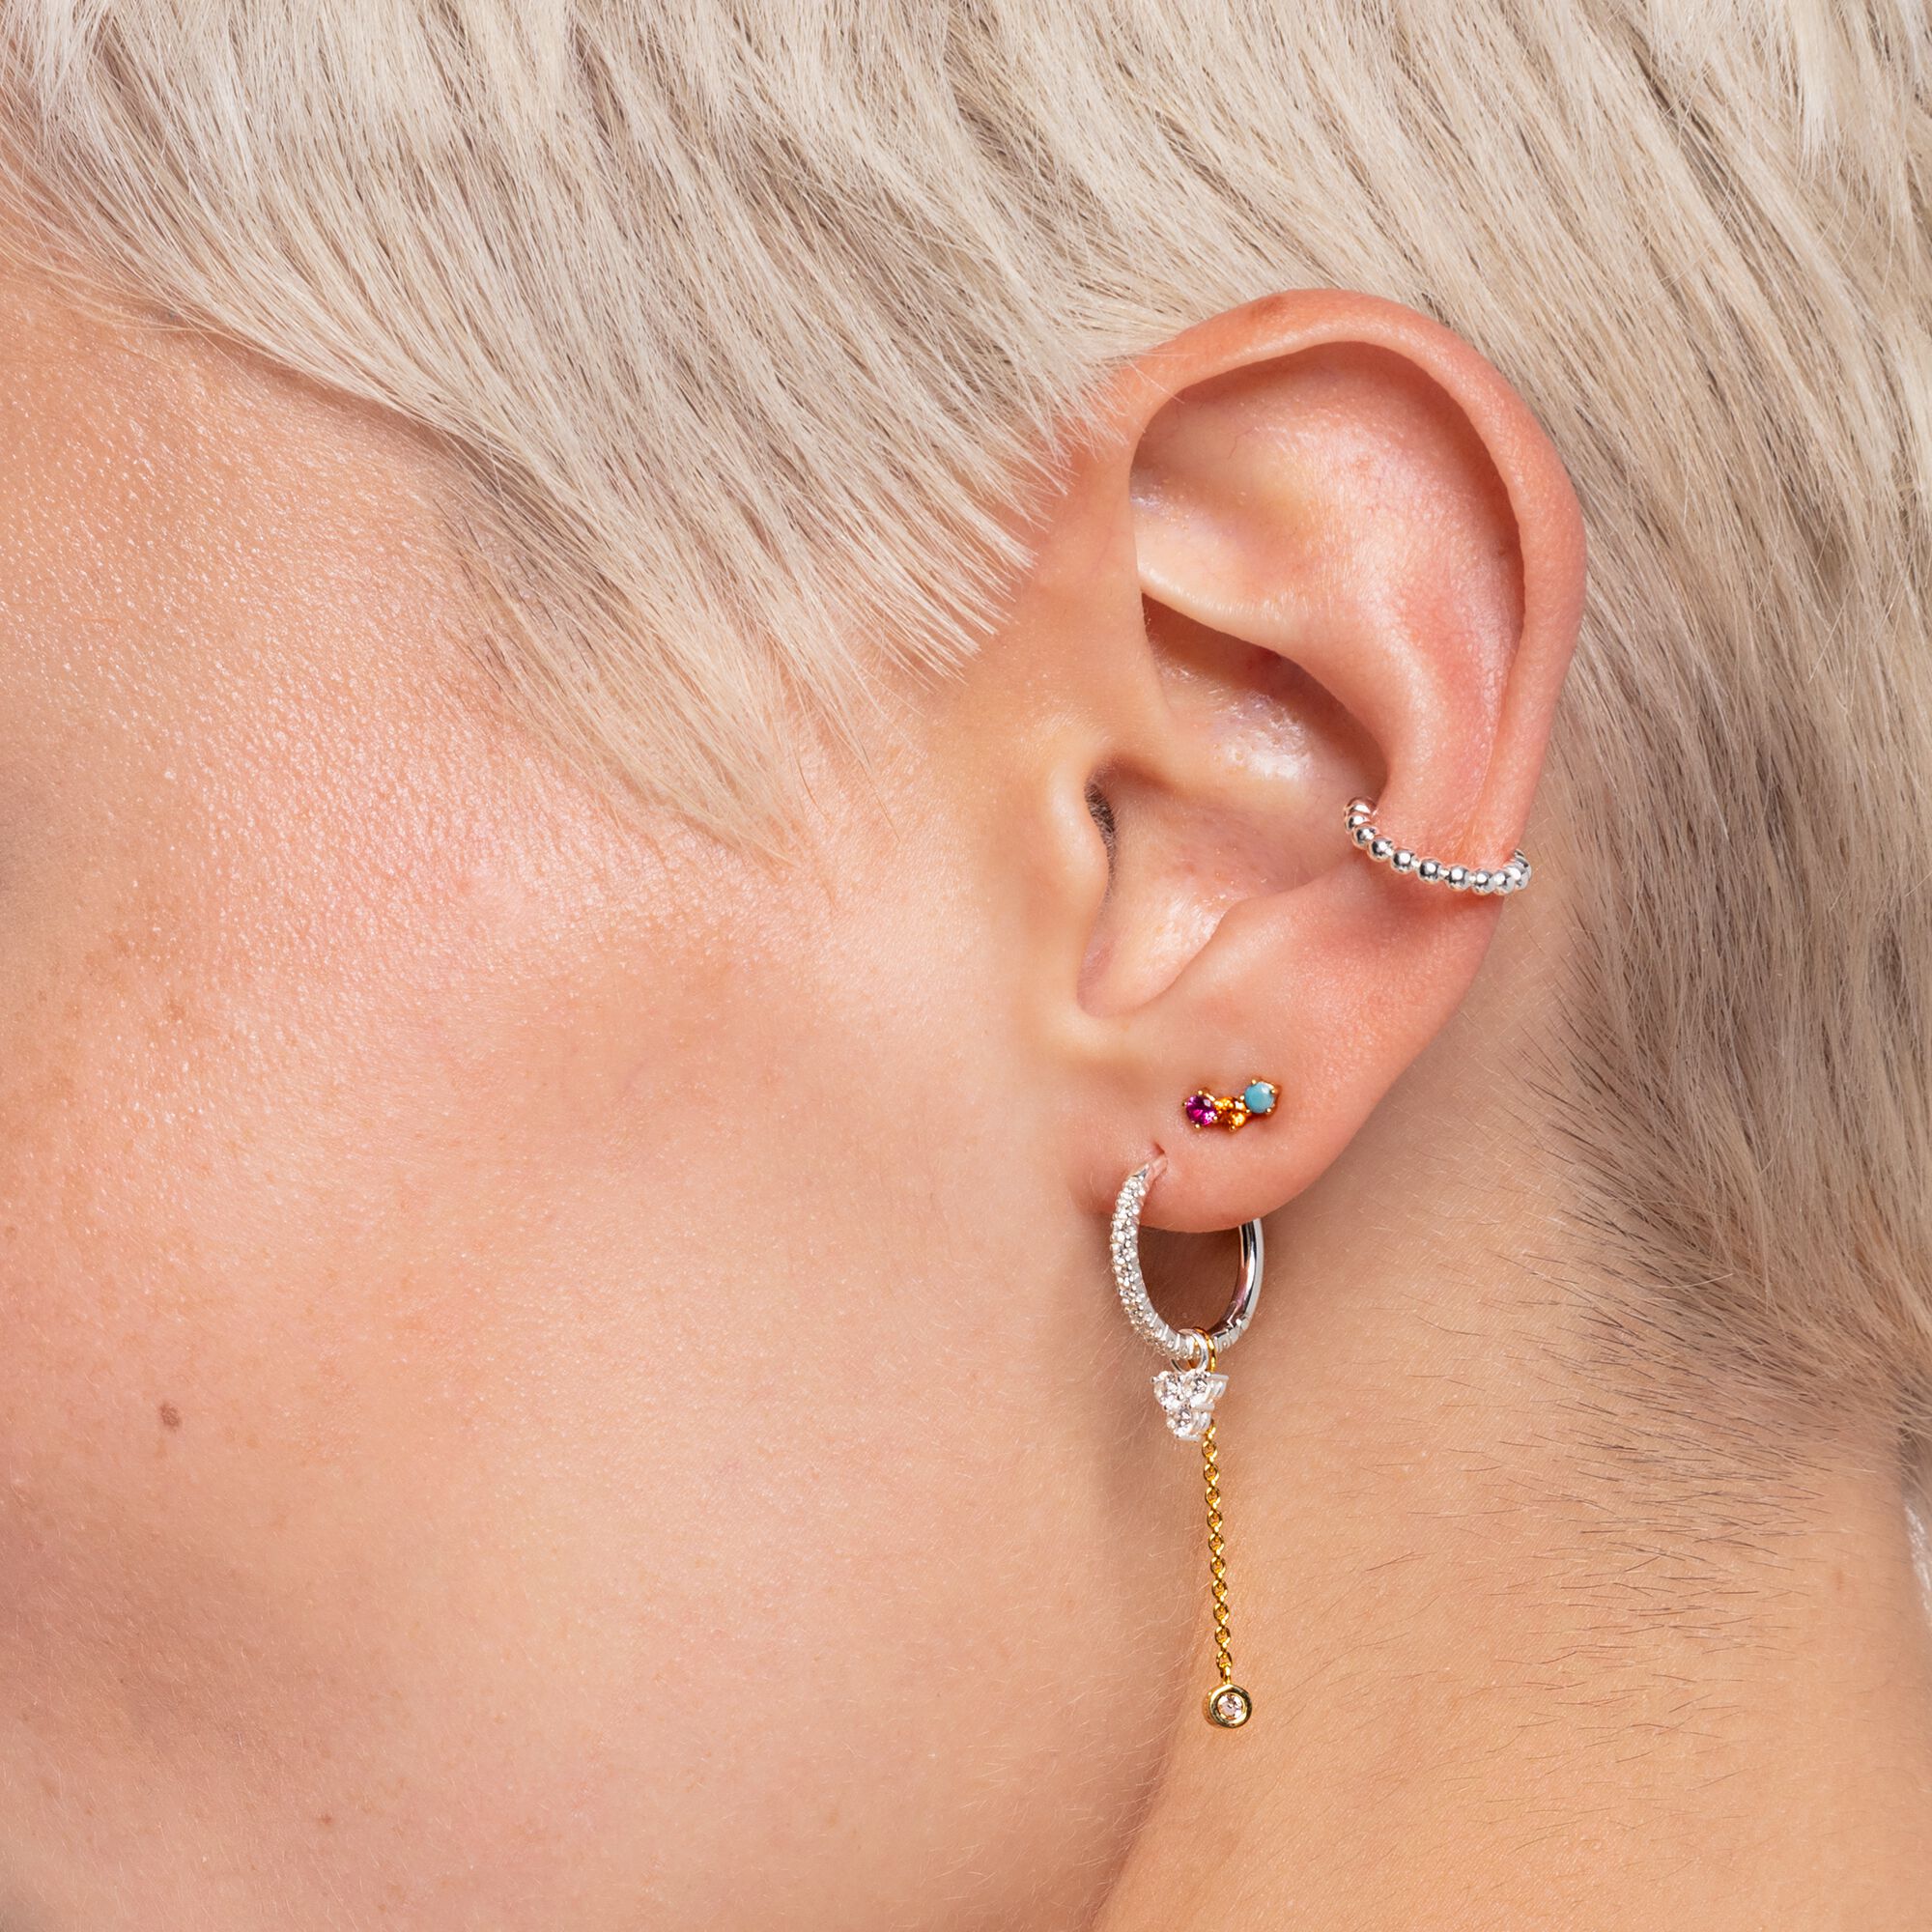 Ear stud with gold stones in │ multi-coloured SABO THOMAS